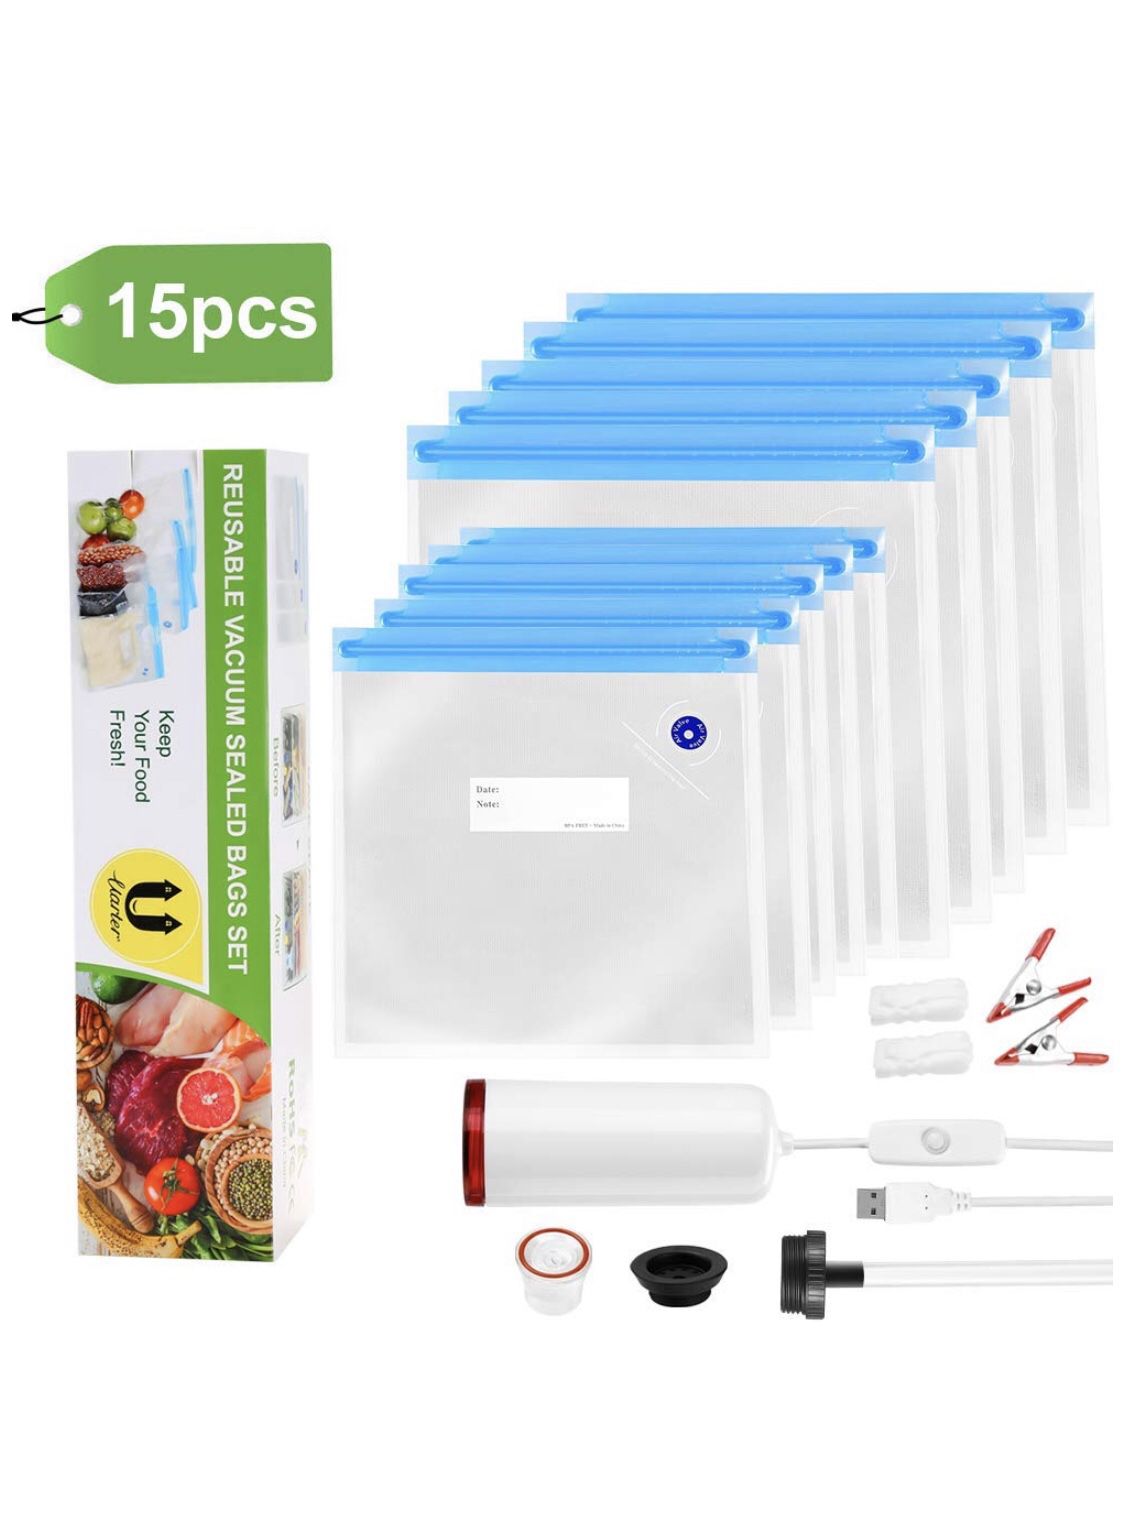 Uarter Sous Vide Bags Kit with Electric Pump For Anova and Joule Cookers, 8 Reusable BPA Free Food Vacuum Sealer Bags, 2 Sealing Clip and 2 Sous Vid